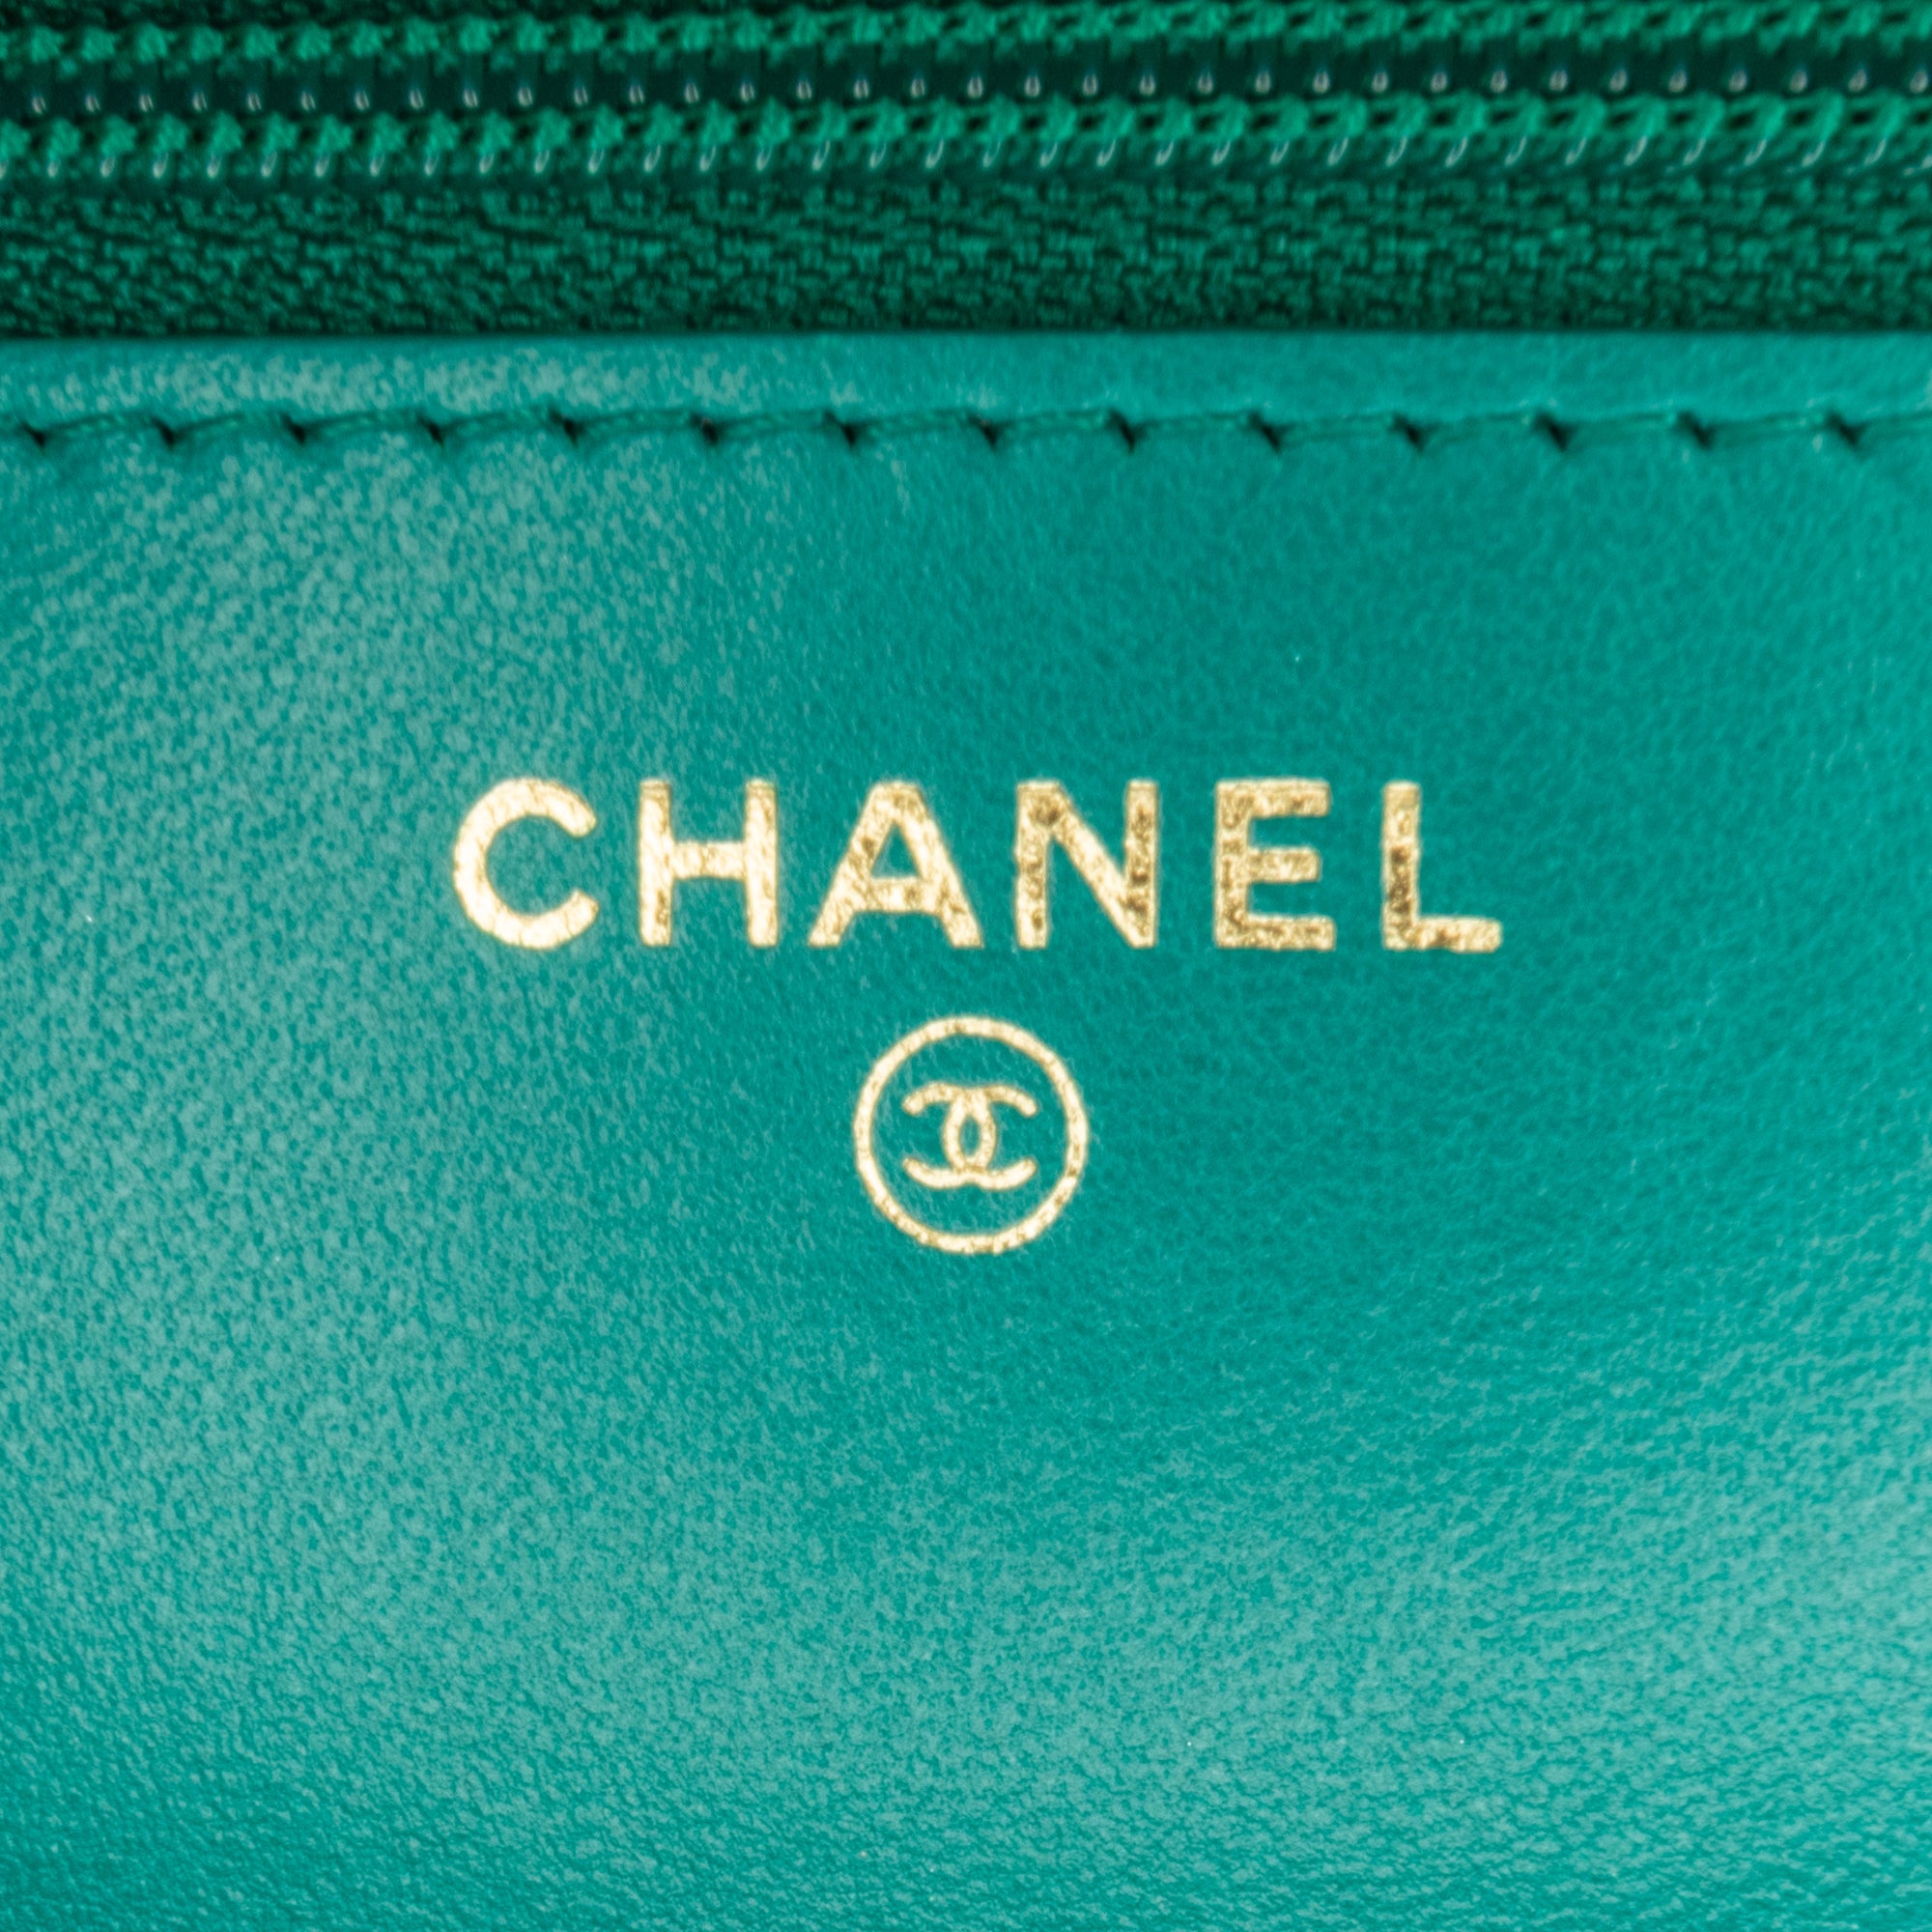 Chanel 19 Wallet On Chain Green Tweed Gold